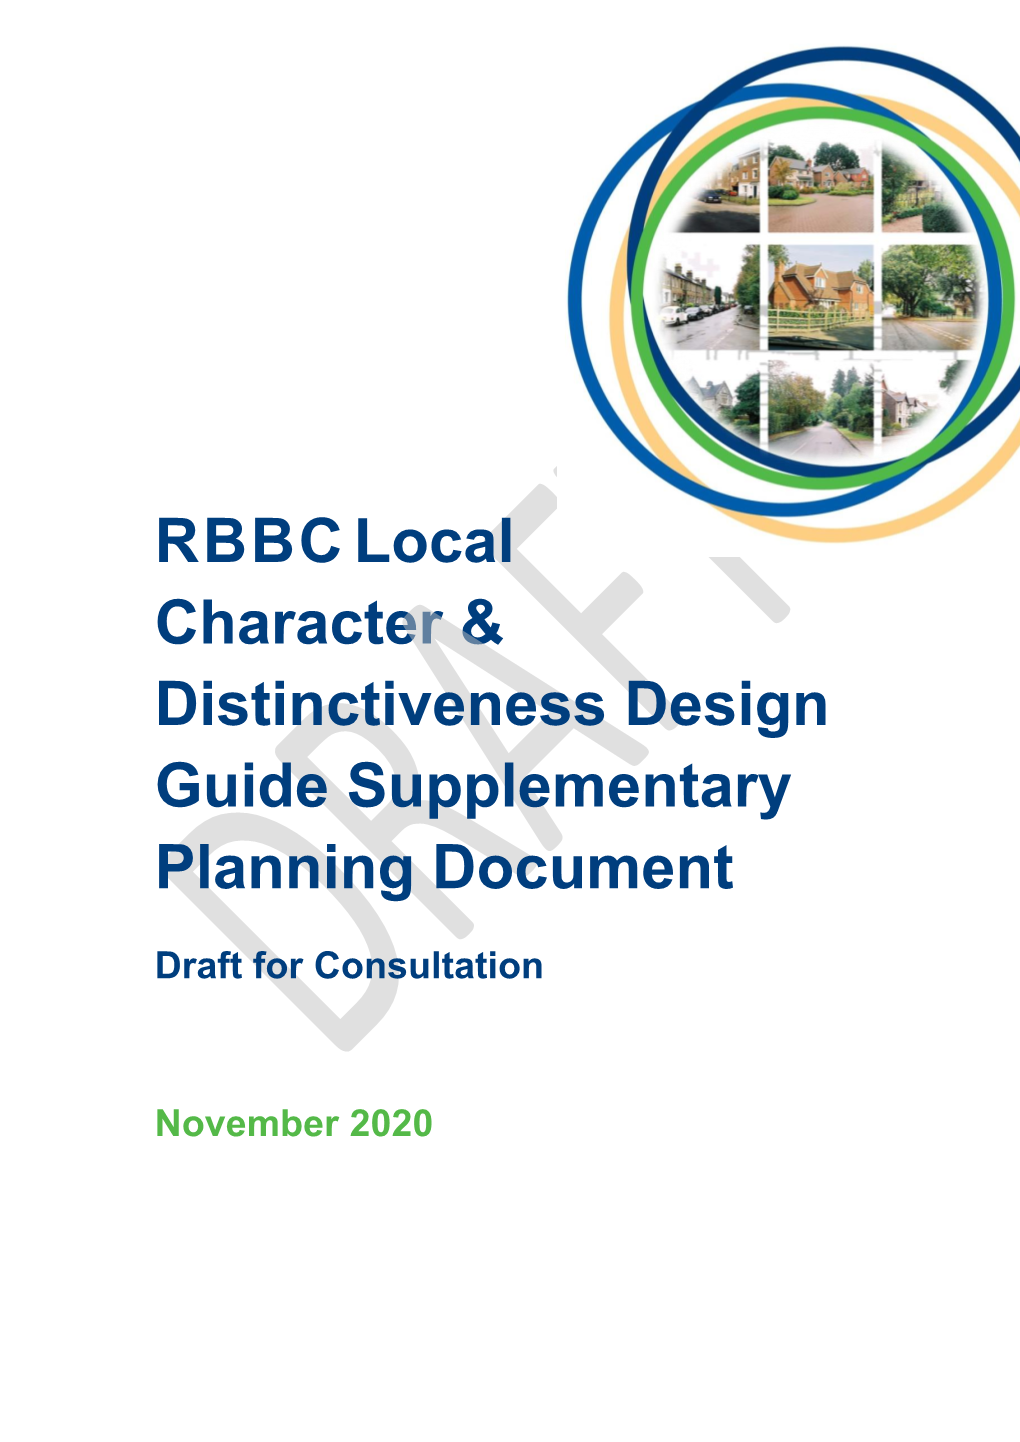 RBBC Local Character & Distinctiveness Design Guide